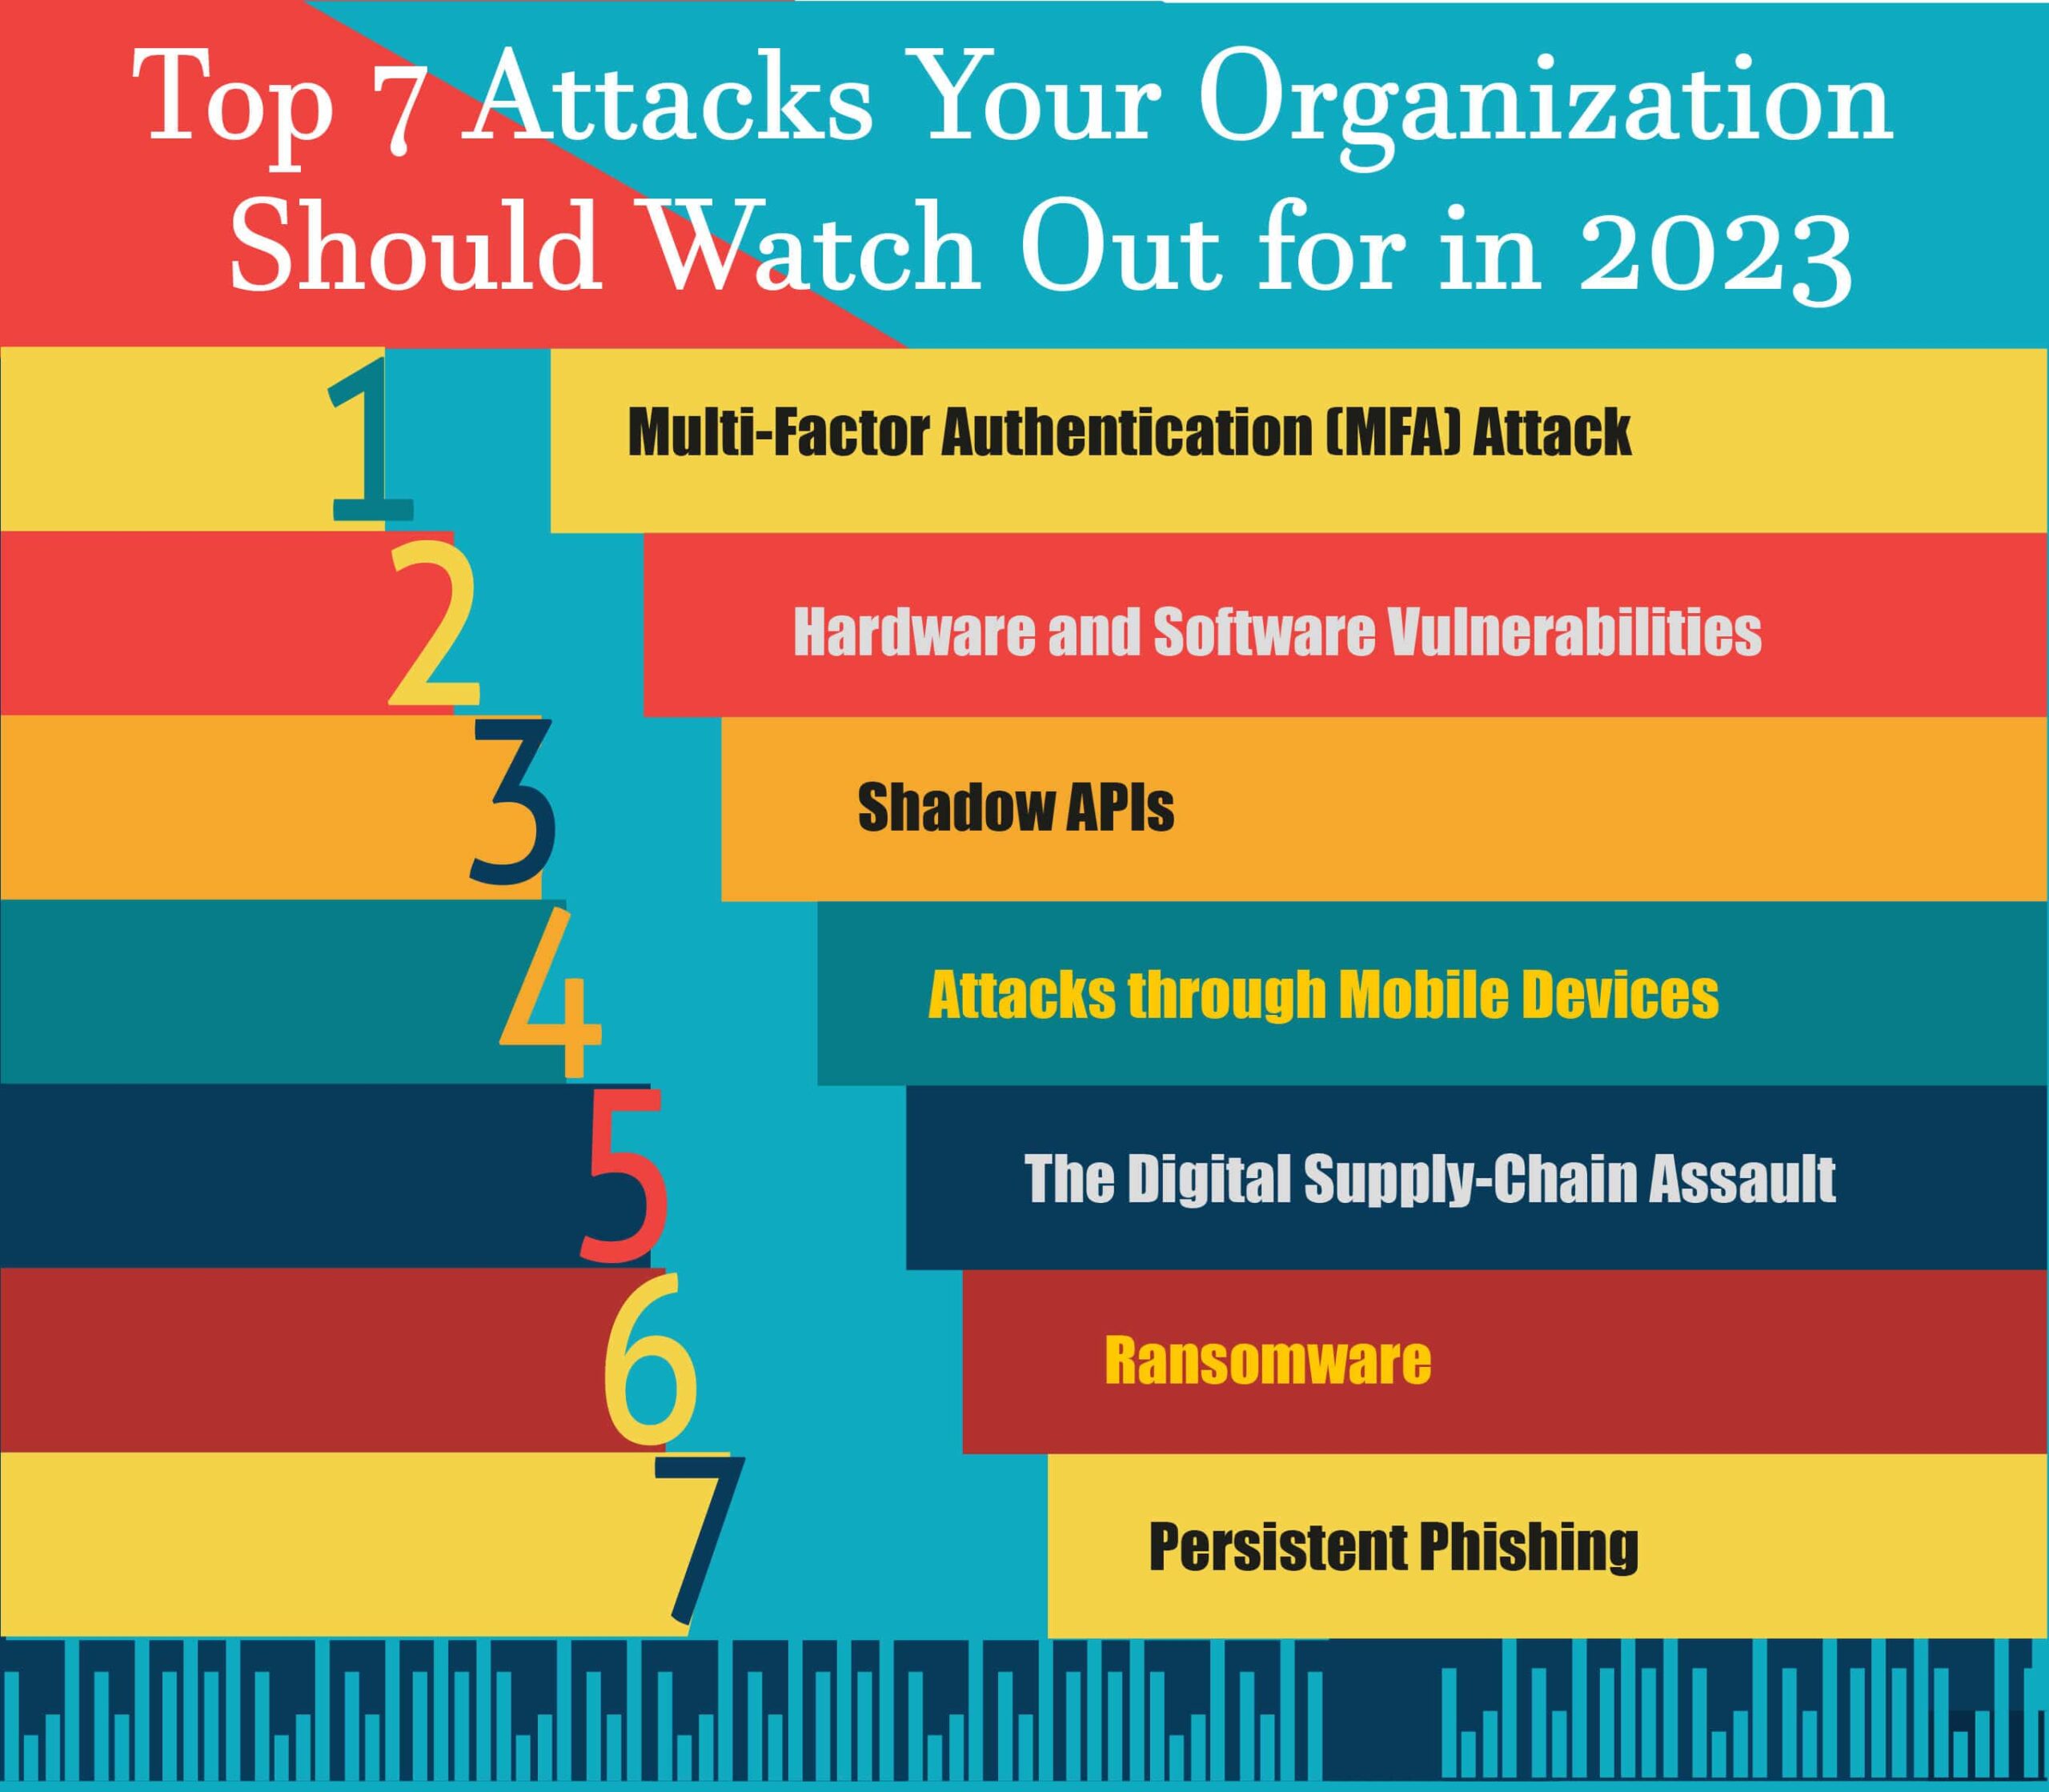 Top 7 Attacks Your Organization Should Watch Out for in 2023